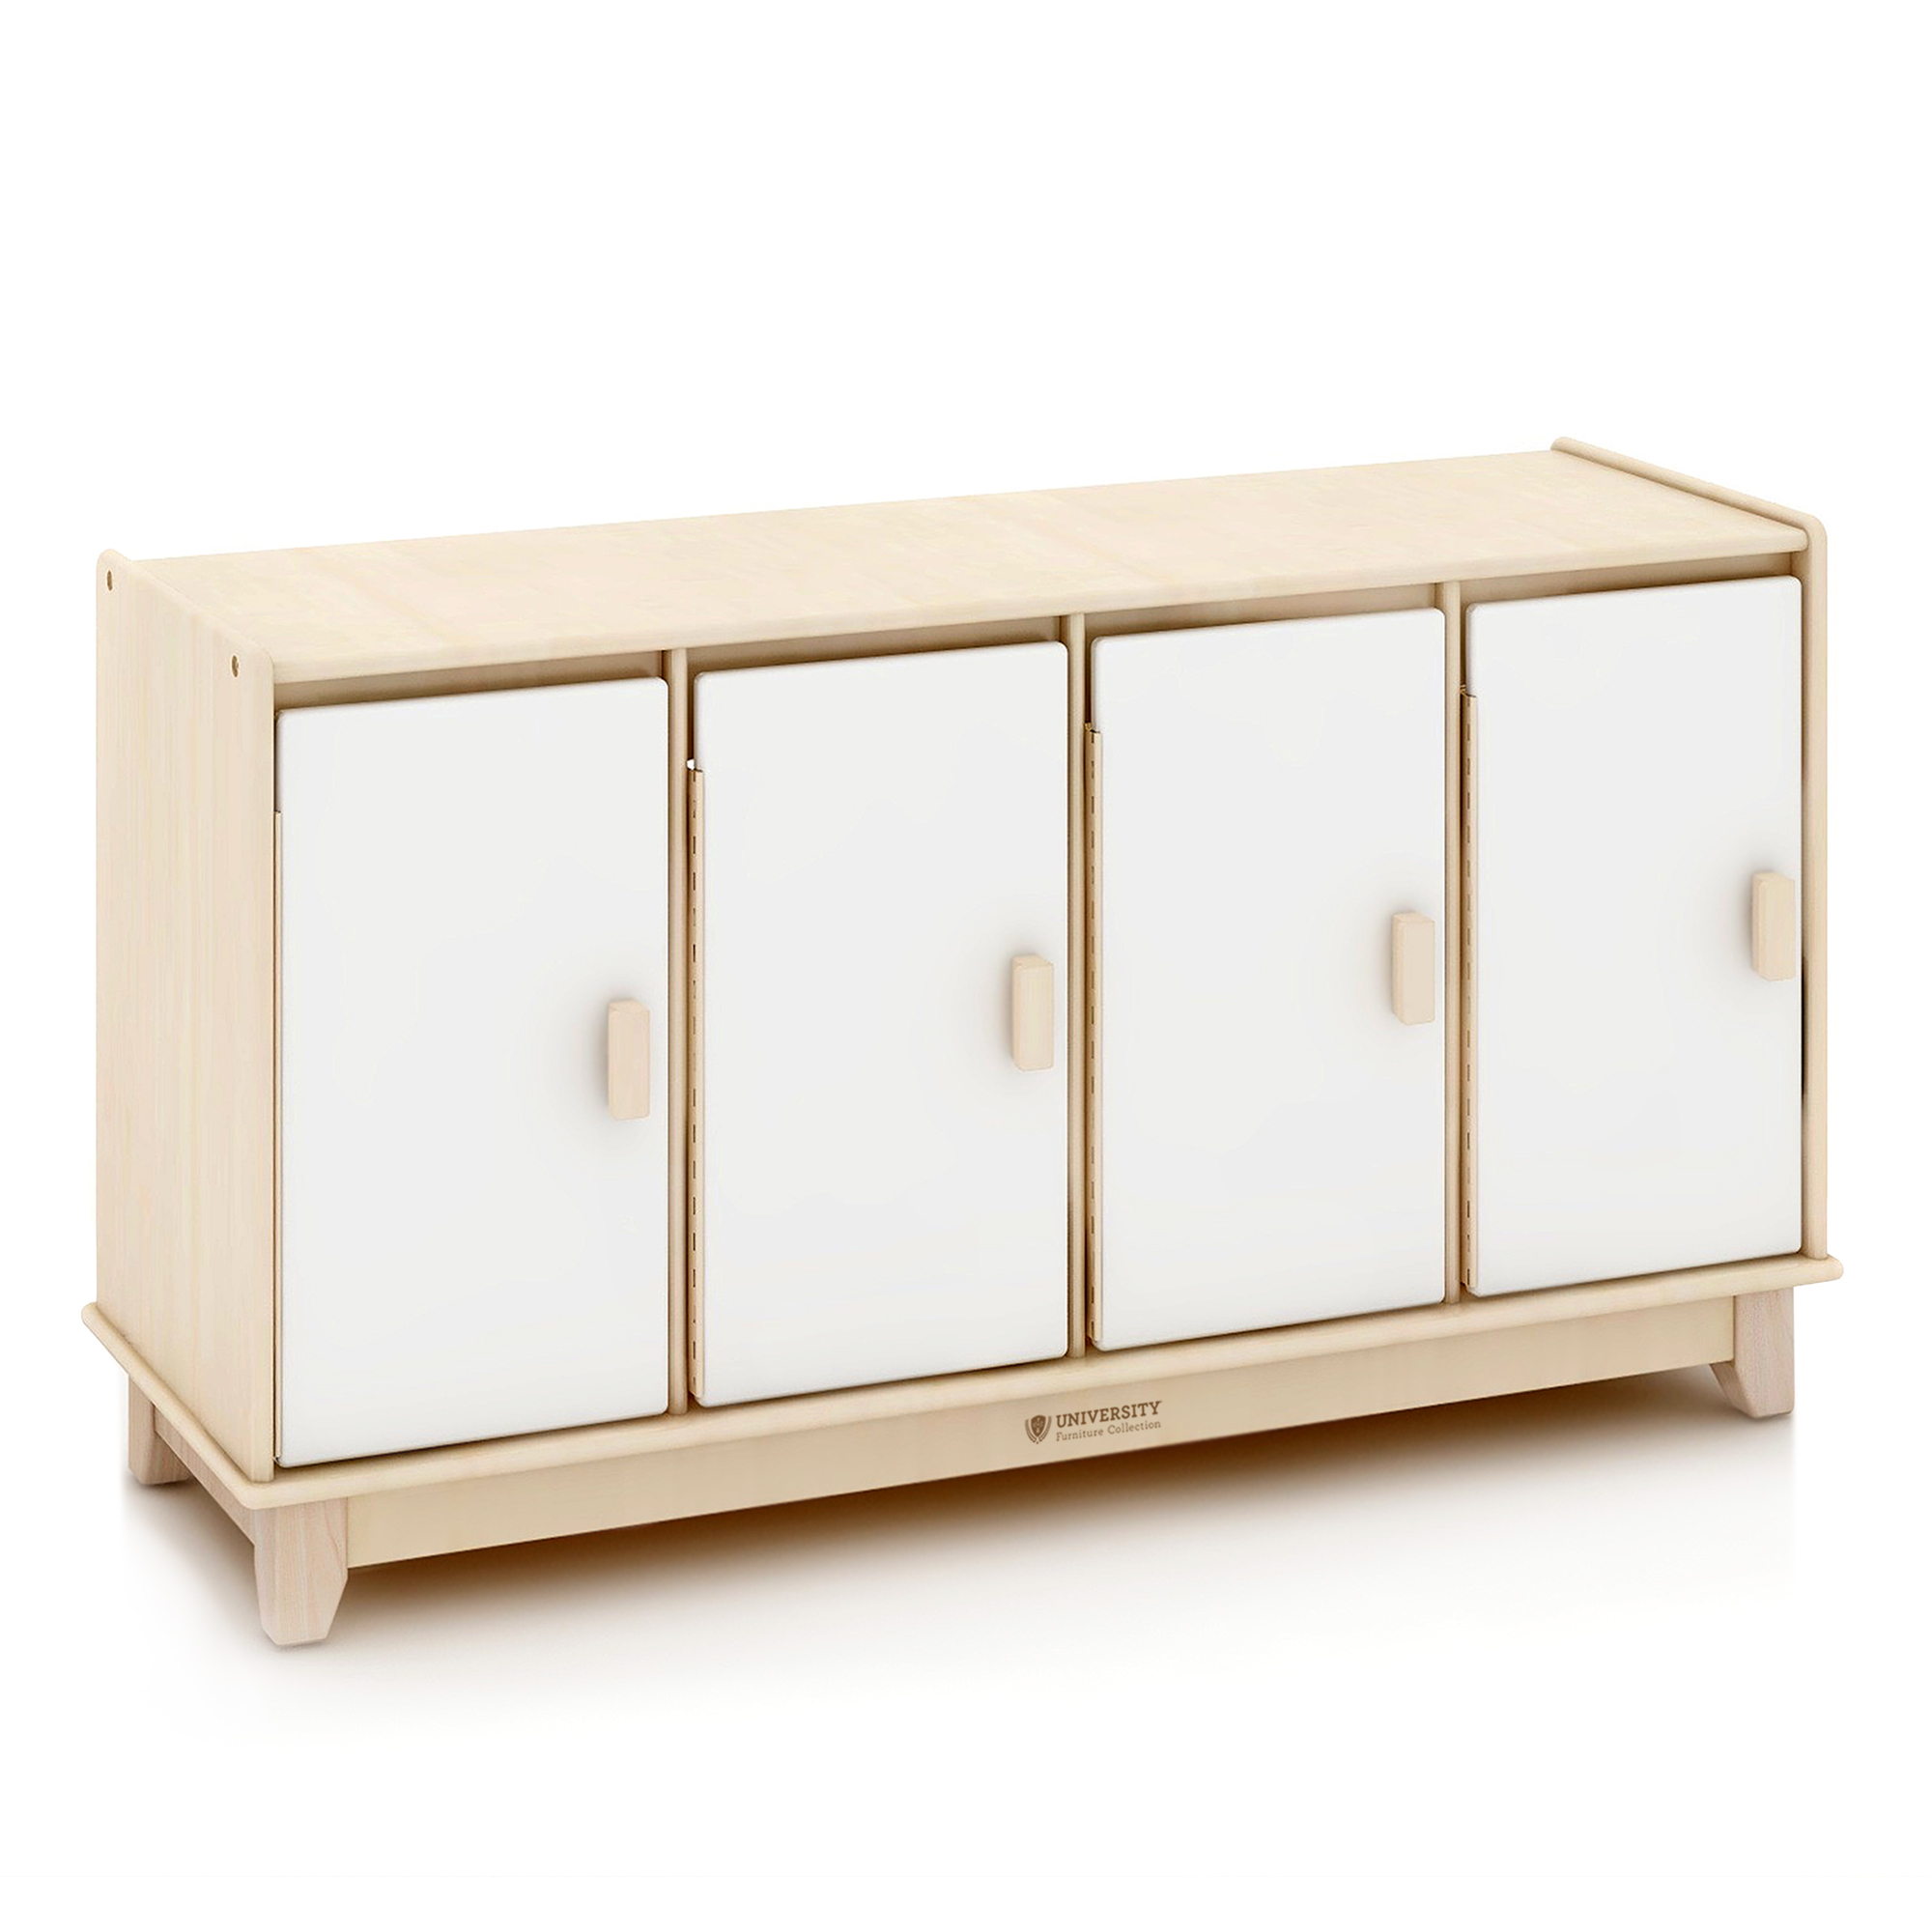 Sense of Play 4-Section Cubby